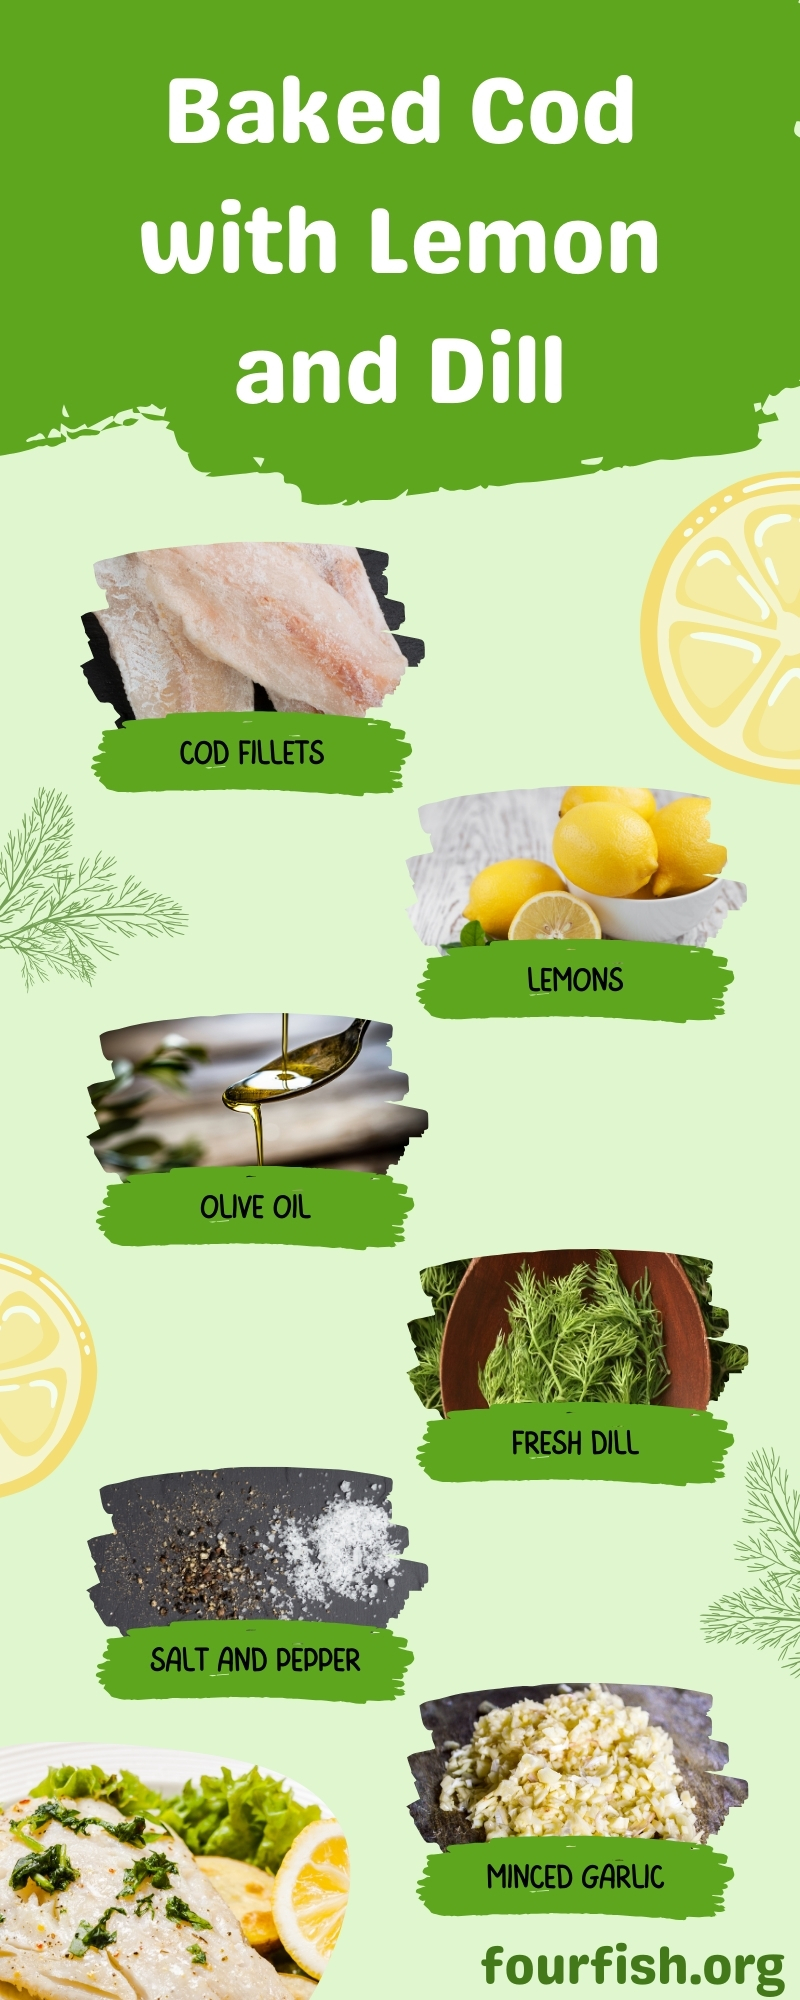 Baked Cod with Lemon and Dill Ingredients Infographic